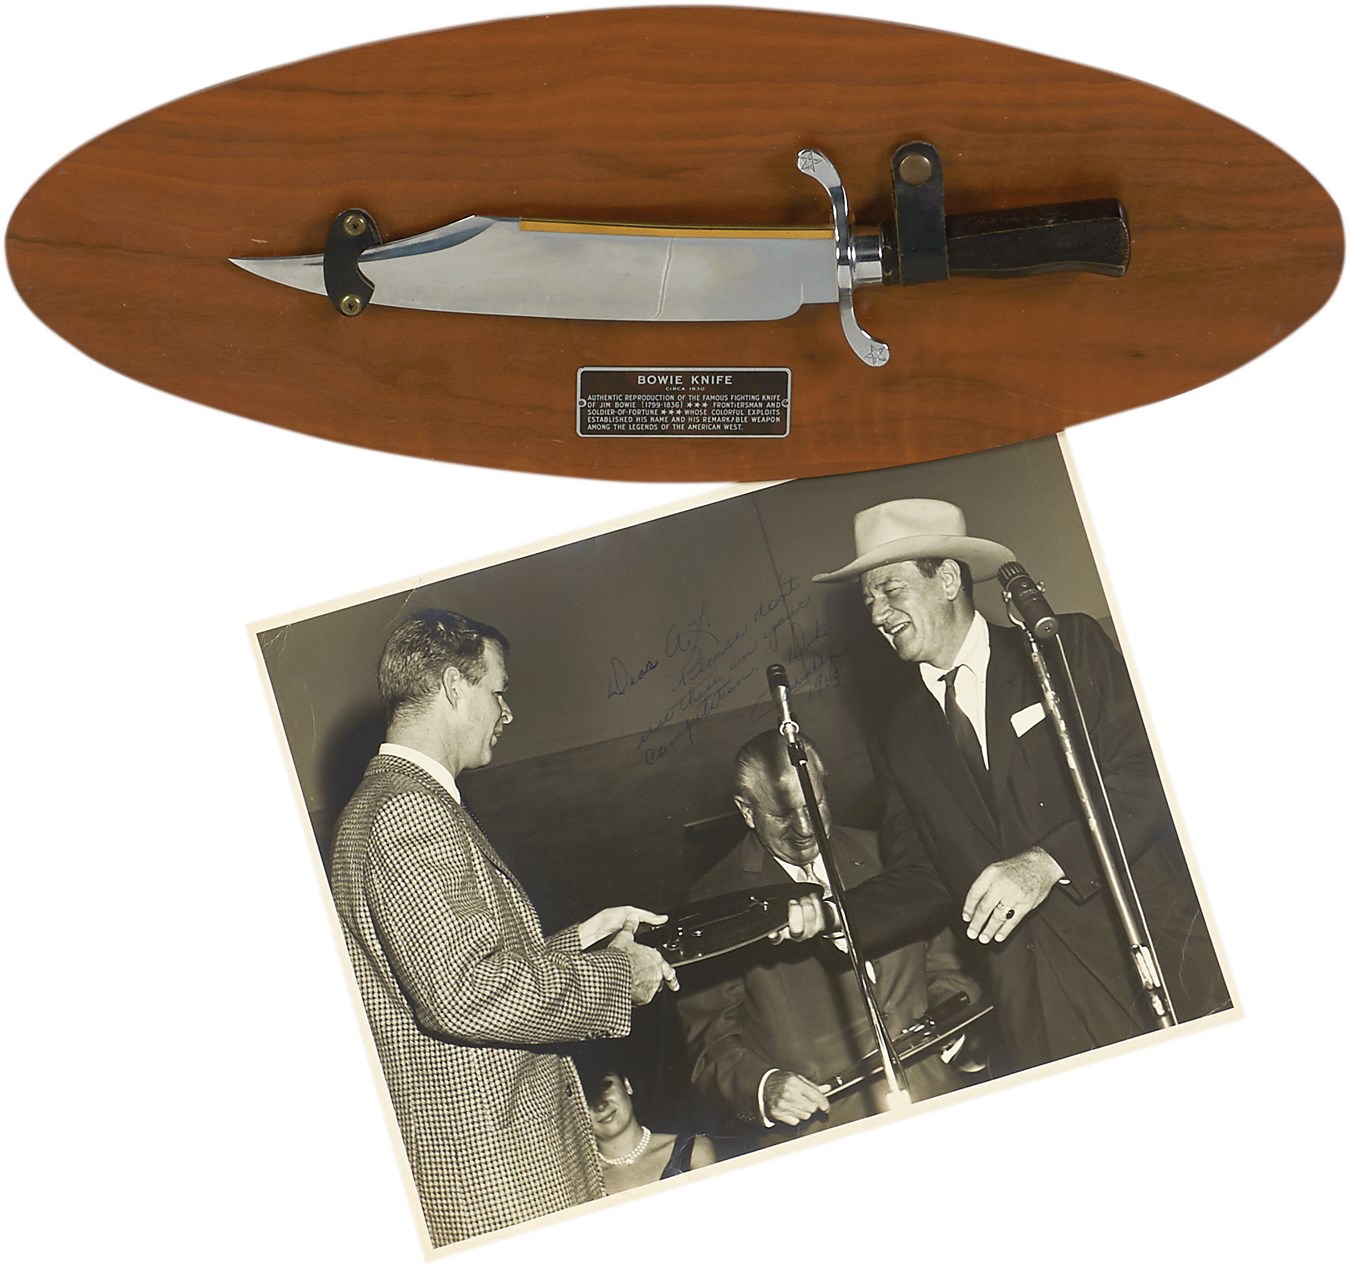 Pop Culture Autographs - 1960 "The Alamo" Bowie Knife Presented by John Wayne w/Signed Photo of Ceremony (Photo-Match)